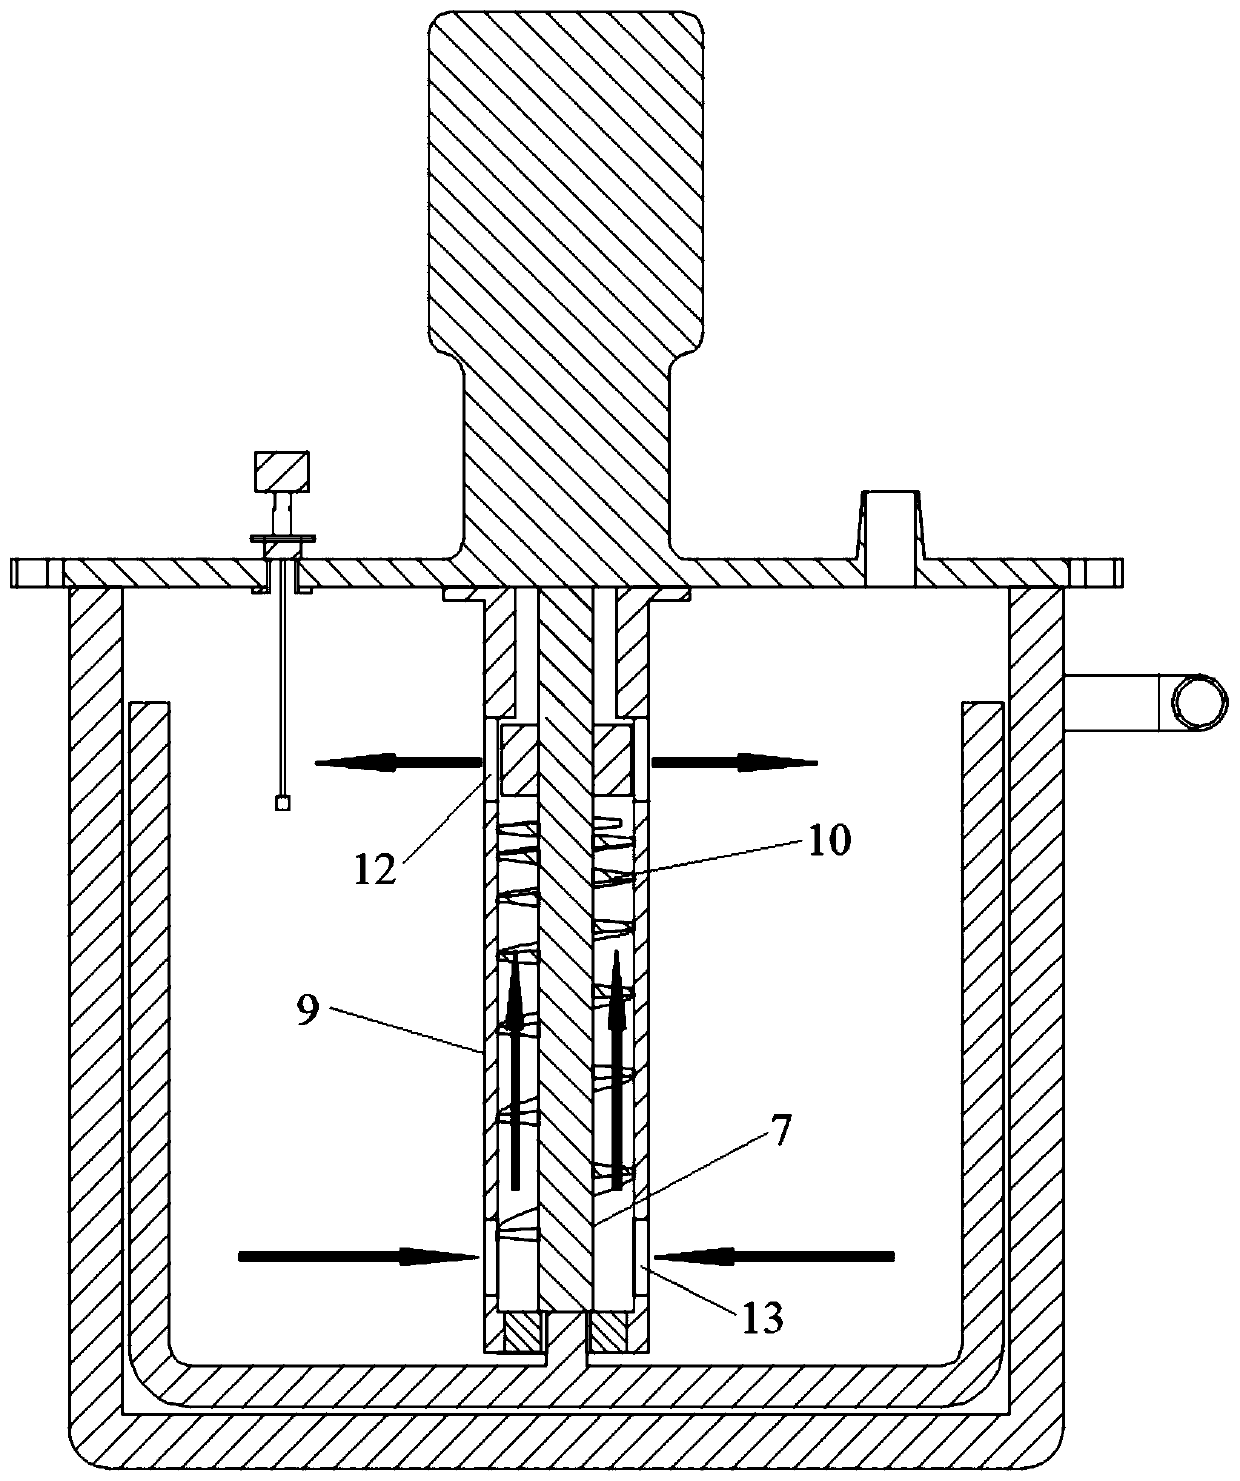 Lithium battery slurry defoaming and grinding method and device